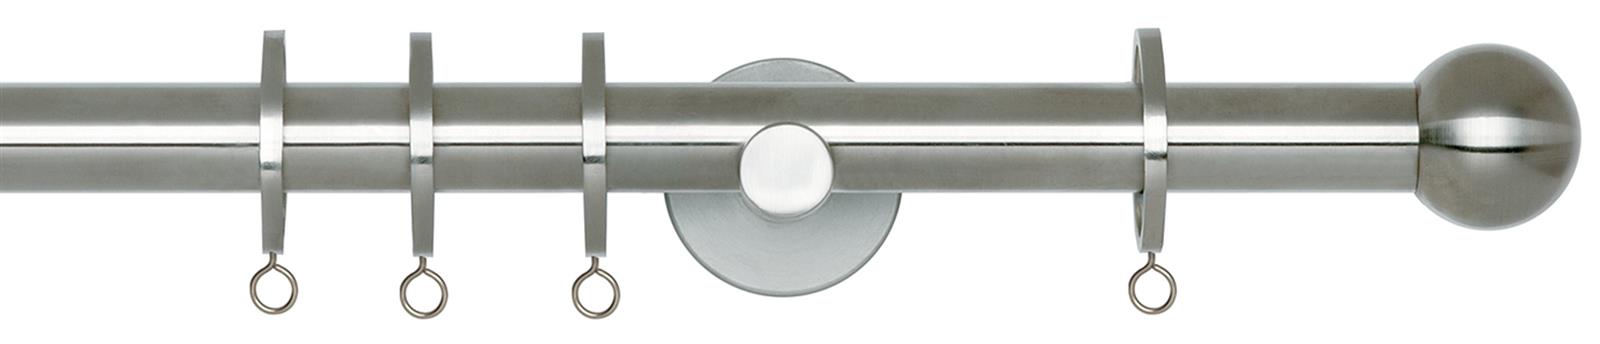 Neo 19mm Pole Stainless Steel Ball